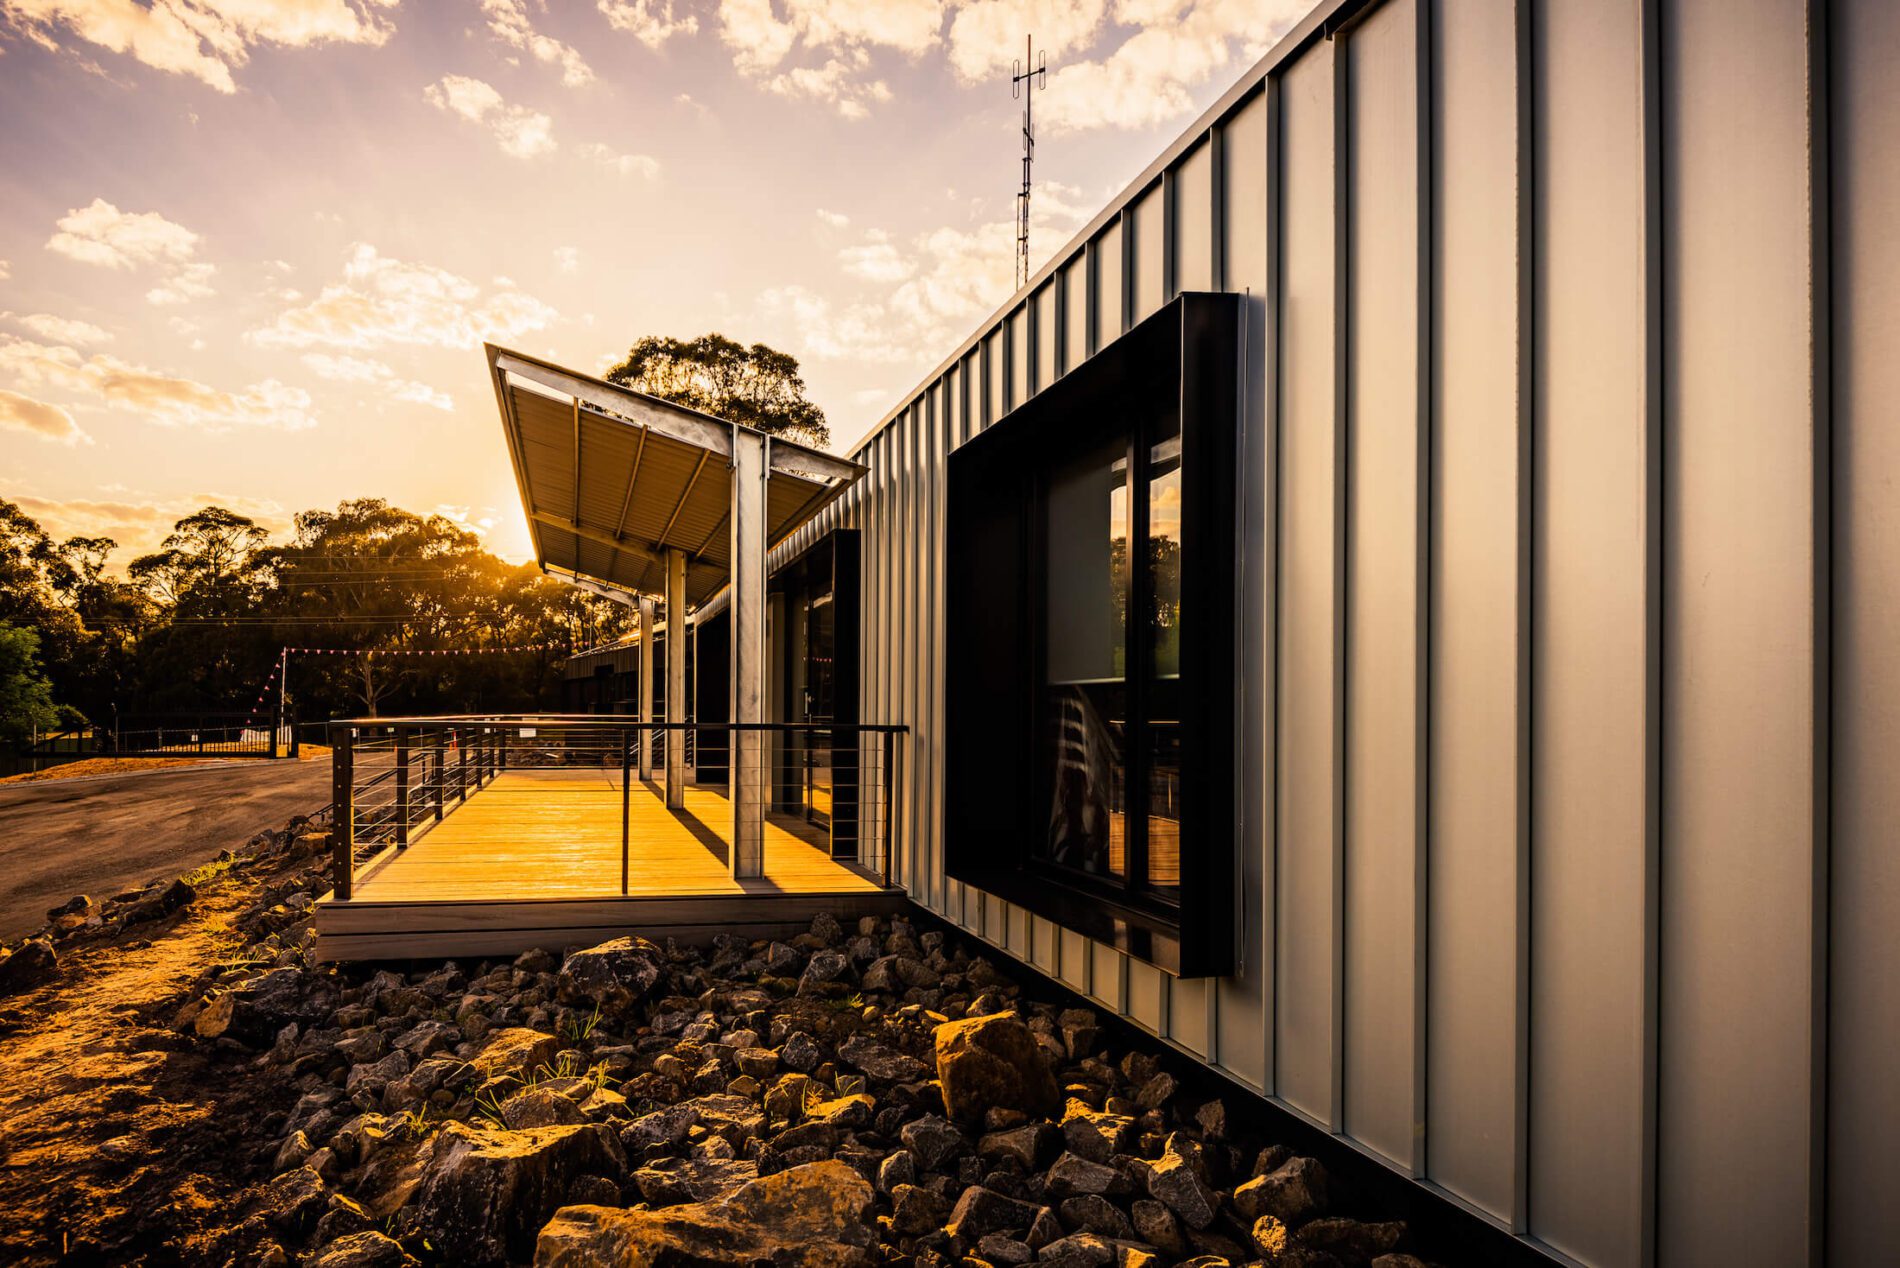 Standing seam metal clad industrial building with slanted canopy over deck at sunset